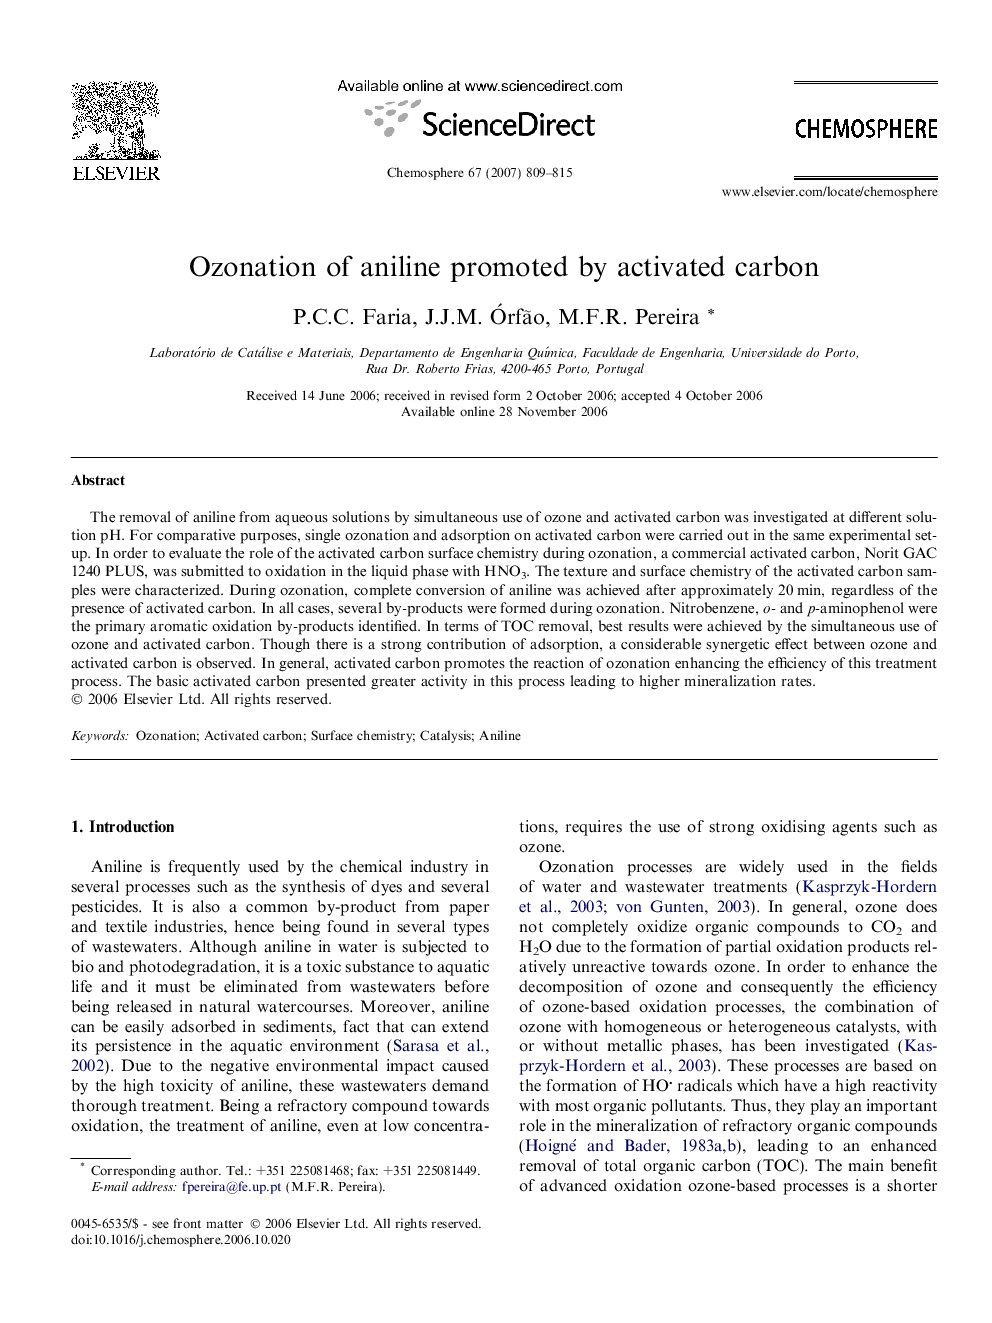 Ozonation of aniline promoted by activated carbon